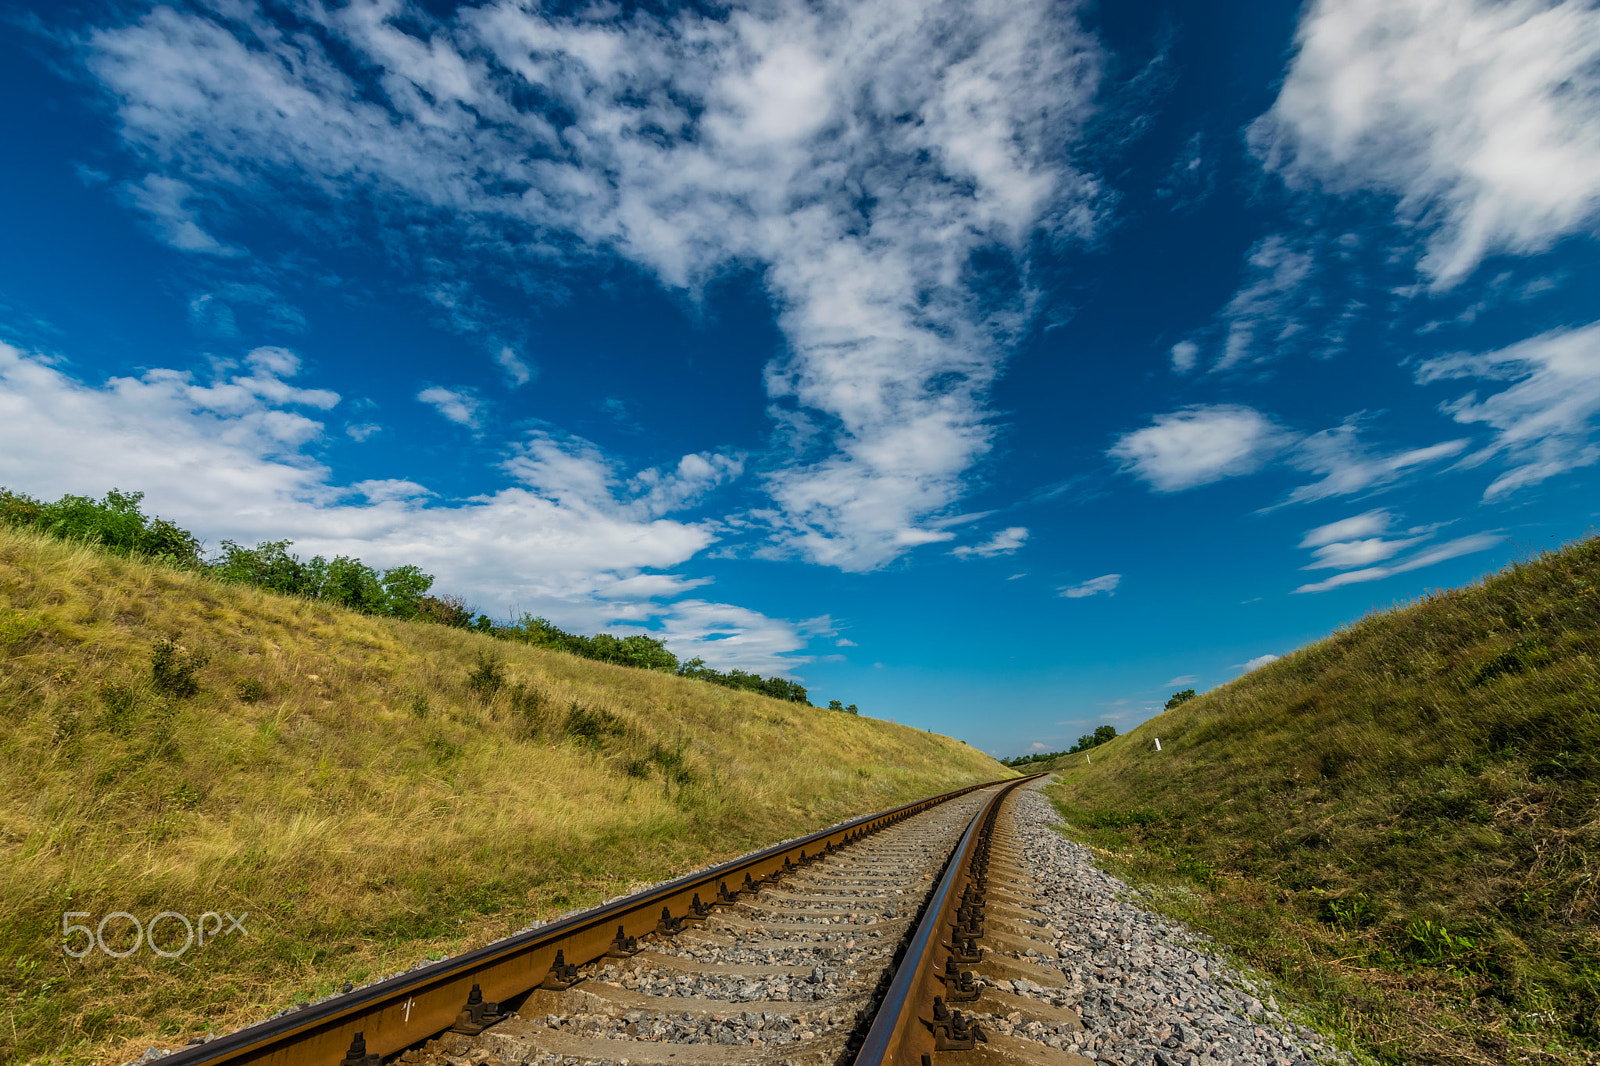 Nikon D3300 + Tokina AT-X 11-20 F2.8 PRO DX (AF 11-20mm f/2.8) sample photo. Railway to nowhere photography